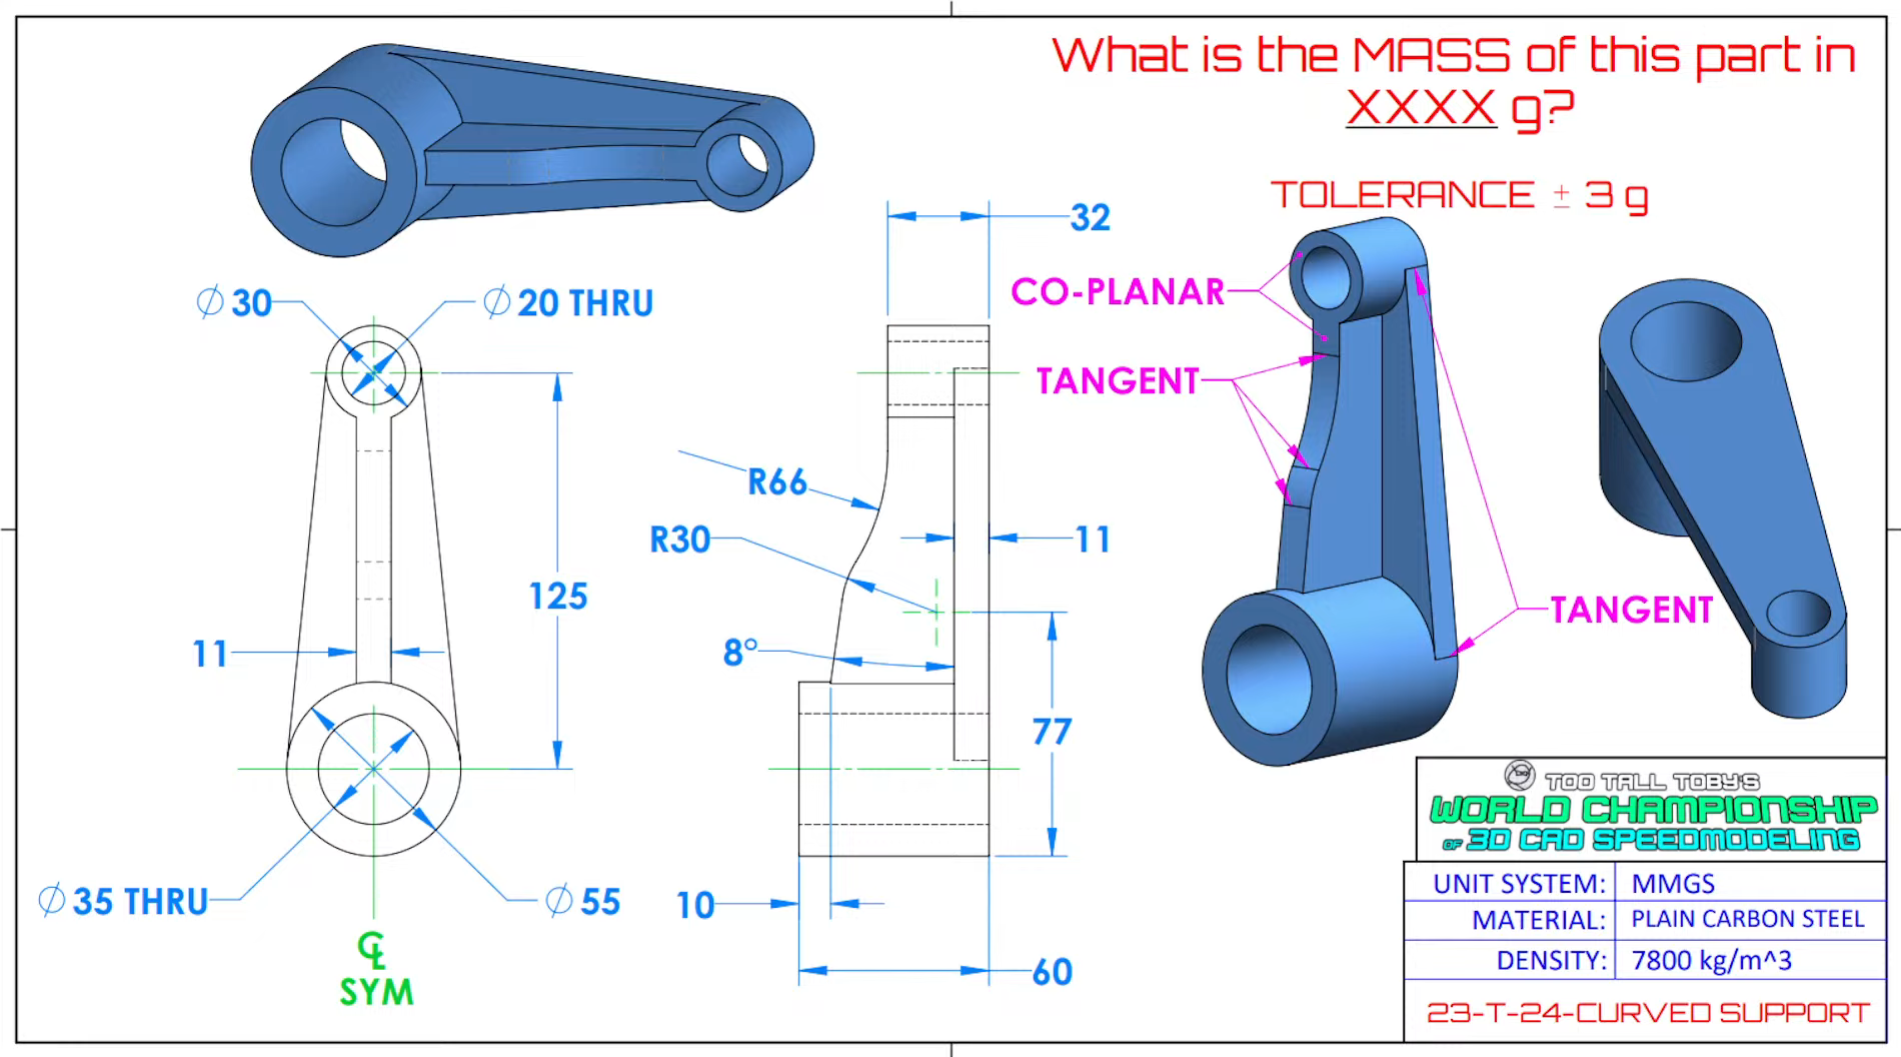 _images/ttt-23-t-24-curved_support.png